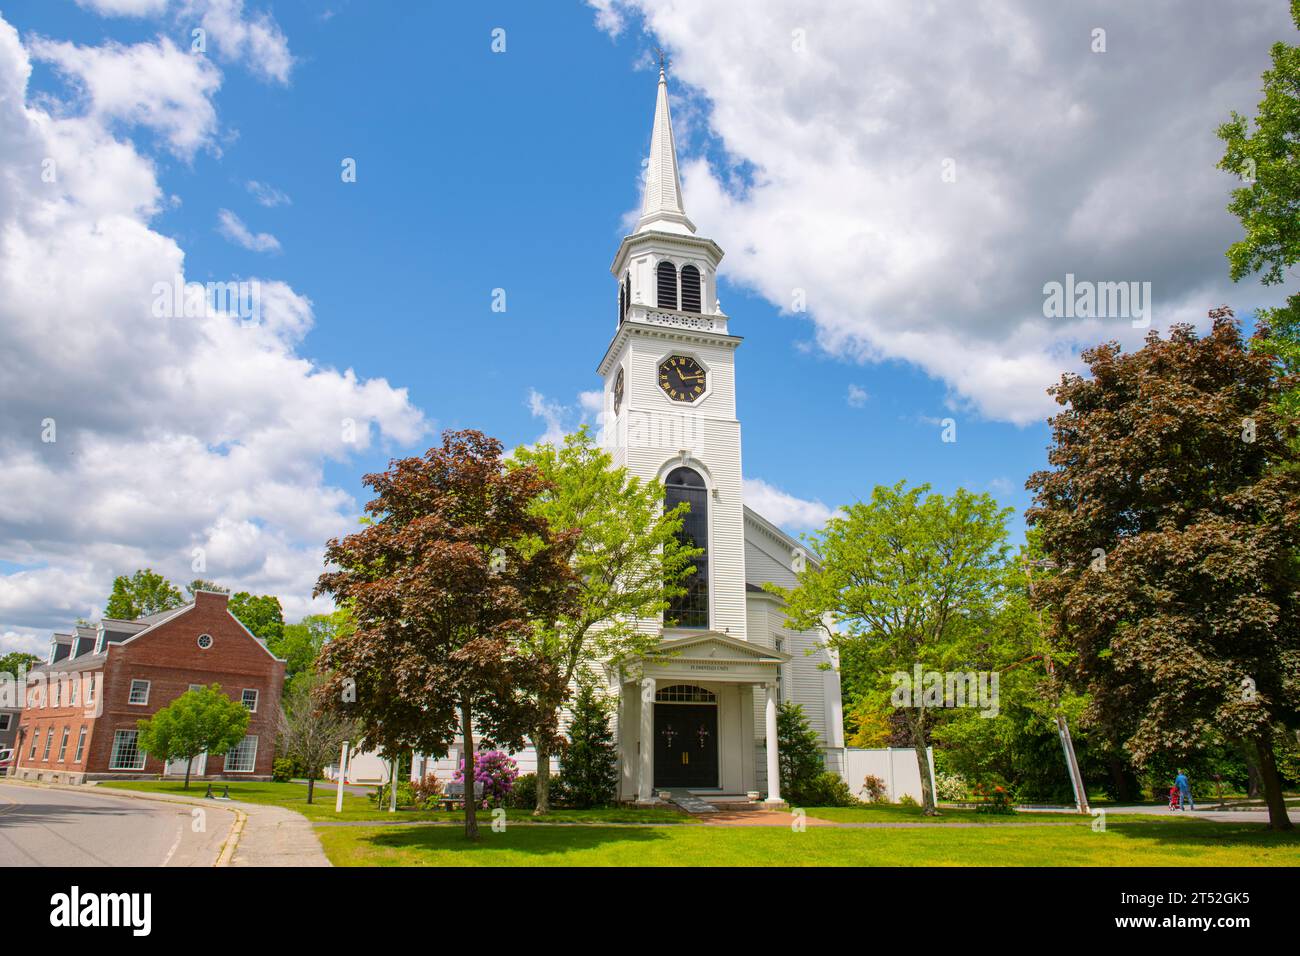 Community Church of Pepperell at 3 Townsend Street in historic town center of Pepperell, Massachusetts MA, USA. Stock Photo